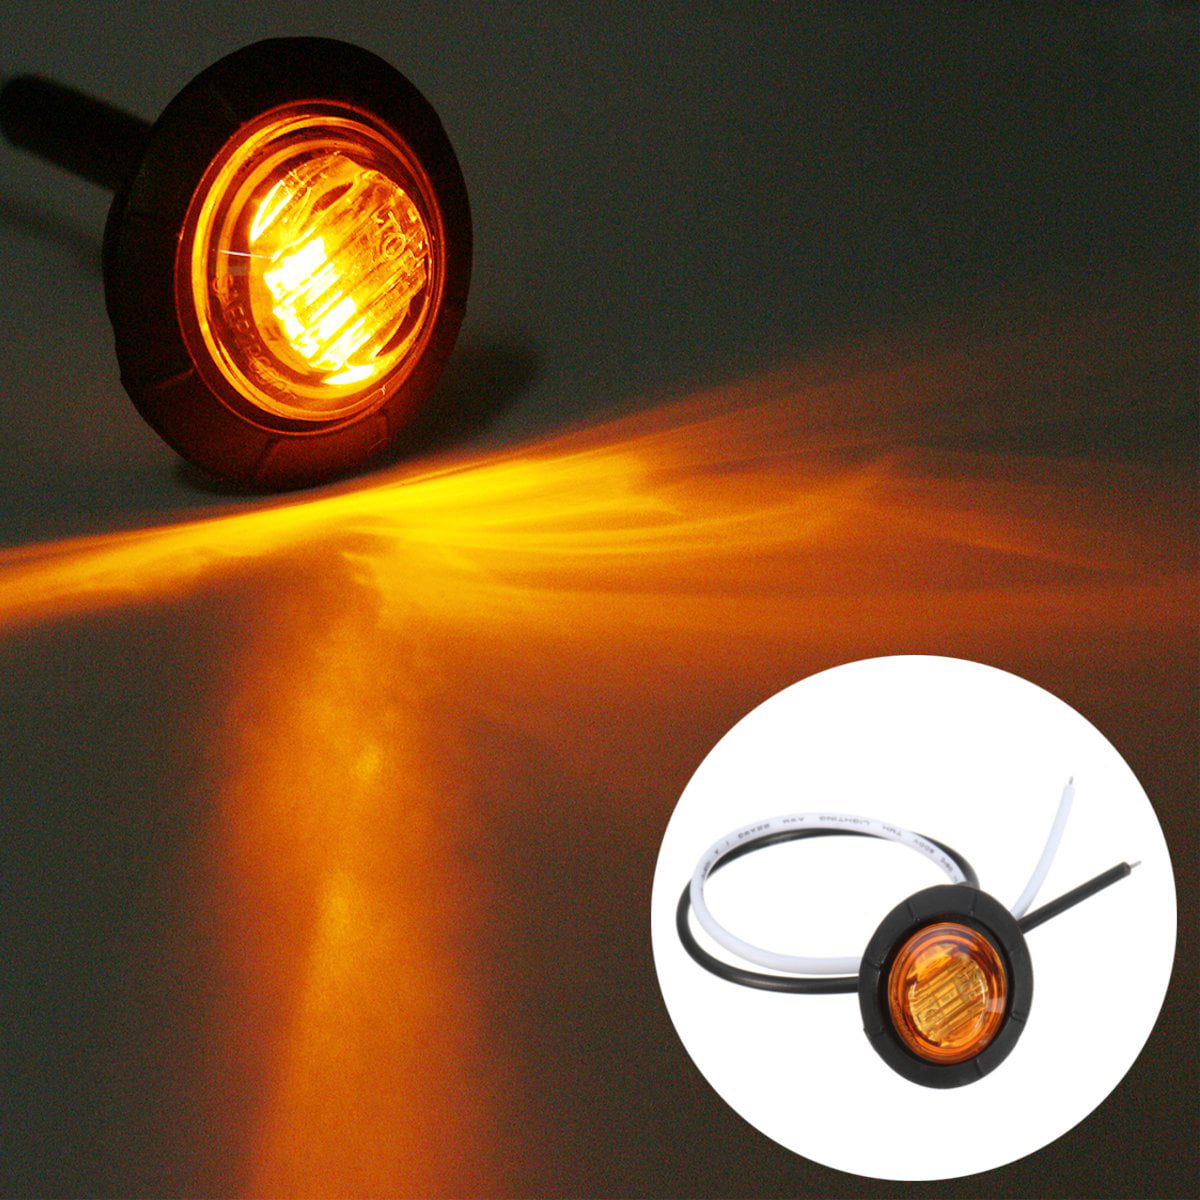 20 x 12V/24V AMBER SMALL ROUND LED BUTTON SIDE MARKER LAMPS/LIGHTS UNIVERSAL